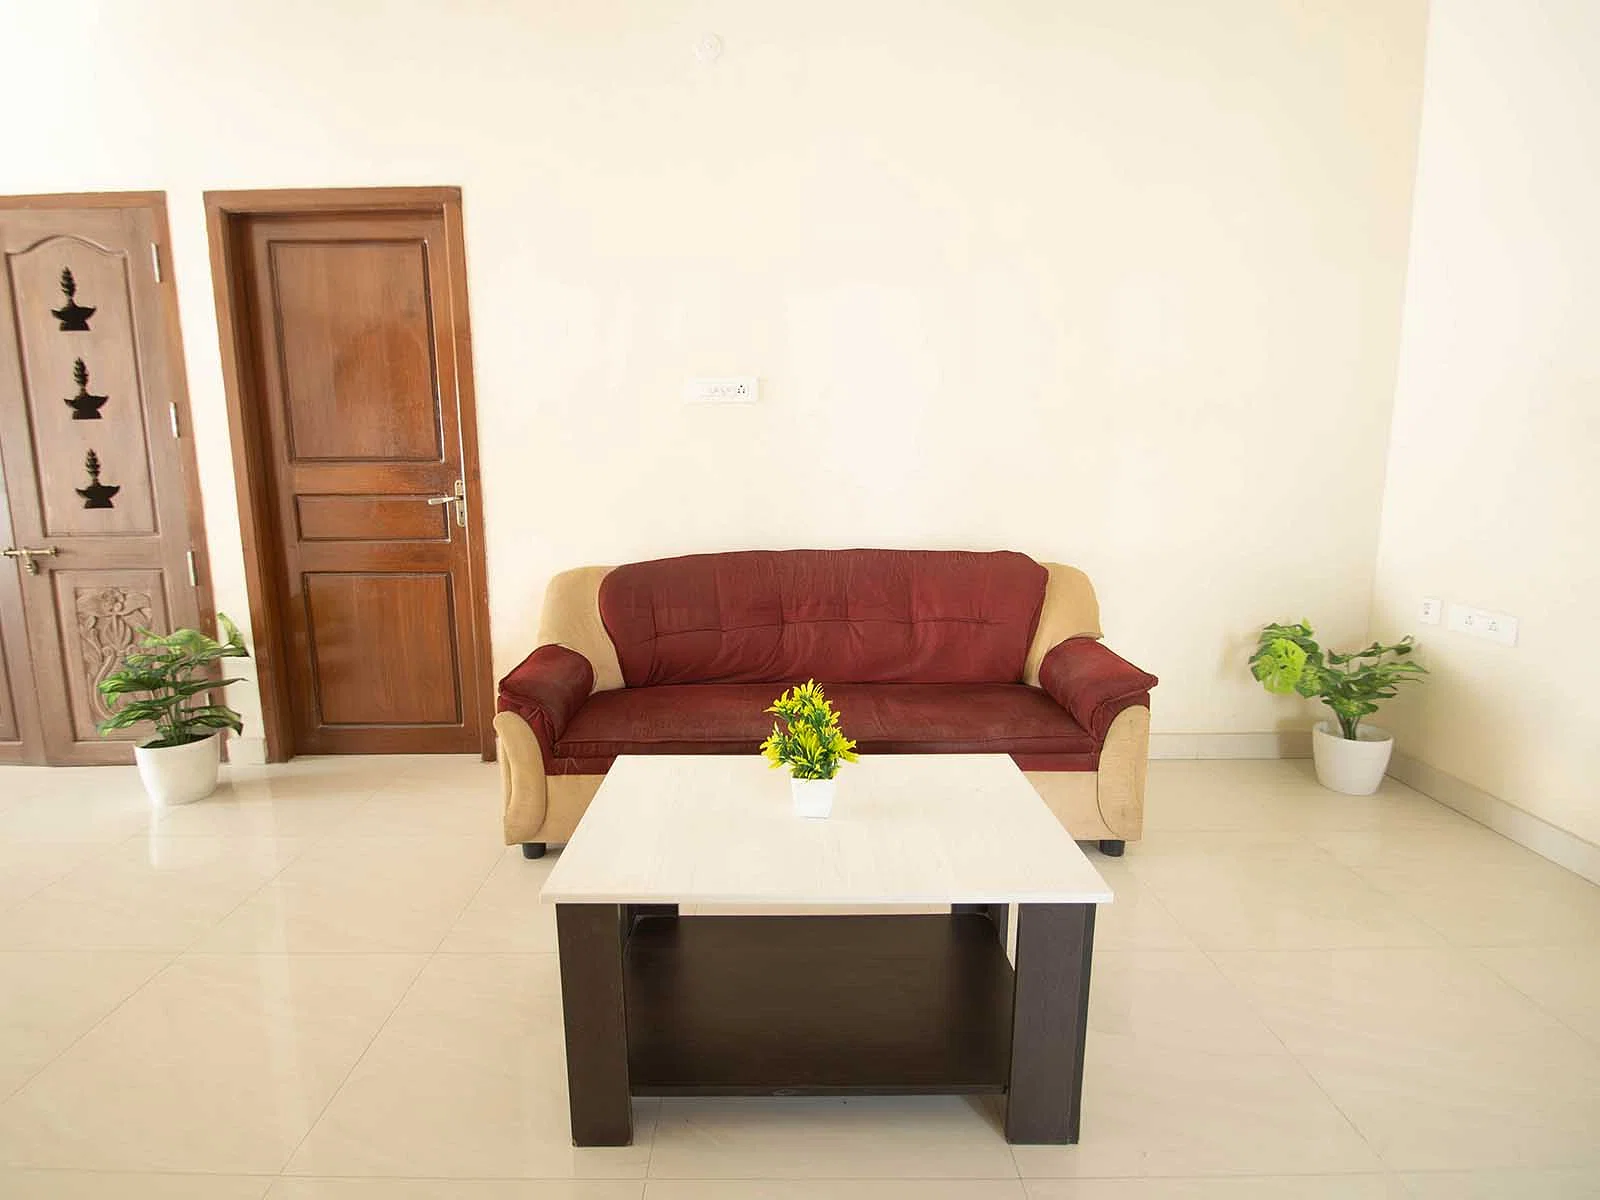 fully furnished Zolo single rooms for rent near me-check out now-Zolo Belford